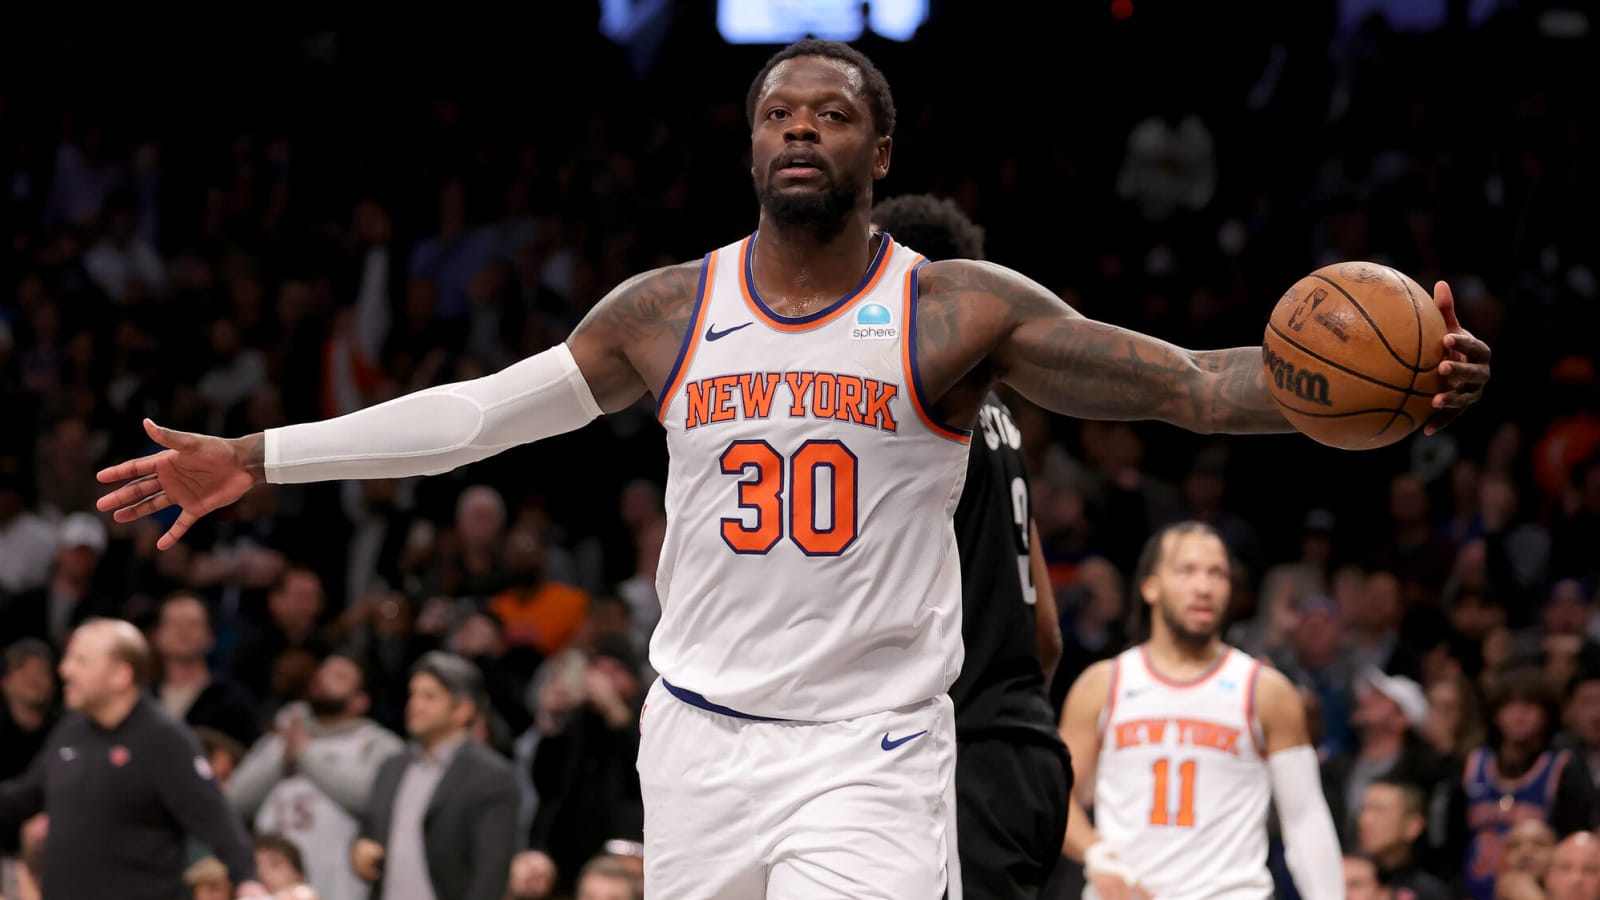 Julius Randle's injury could cost him spot on Knicks roster